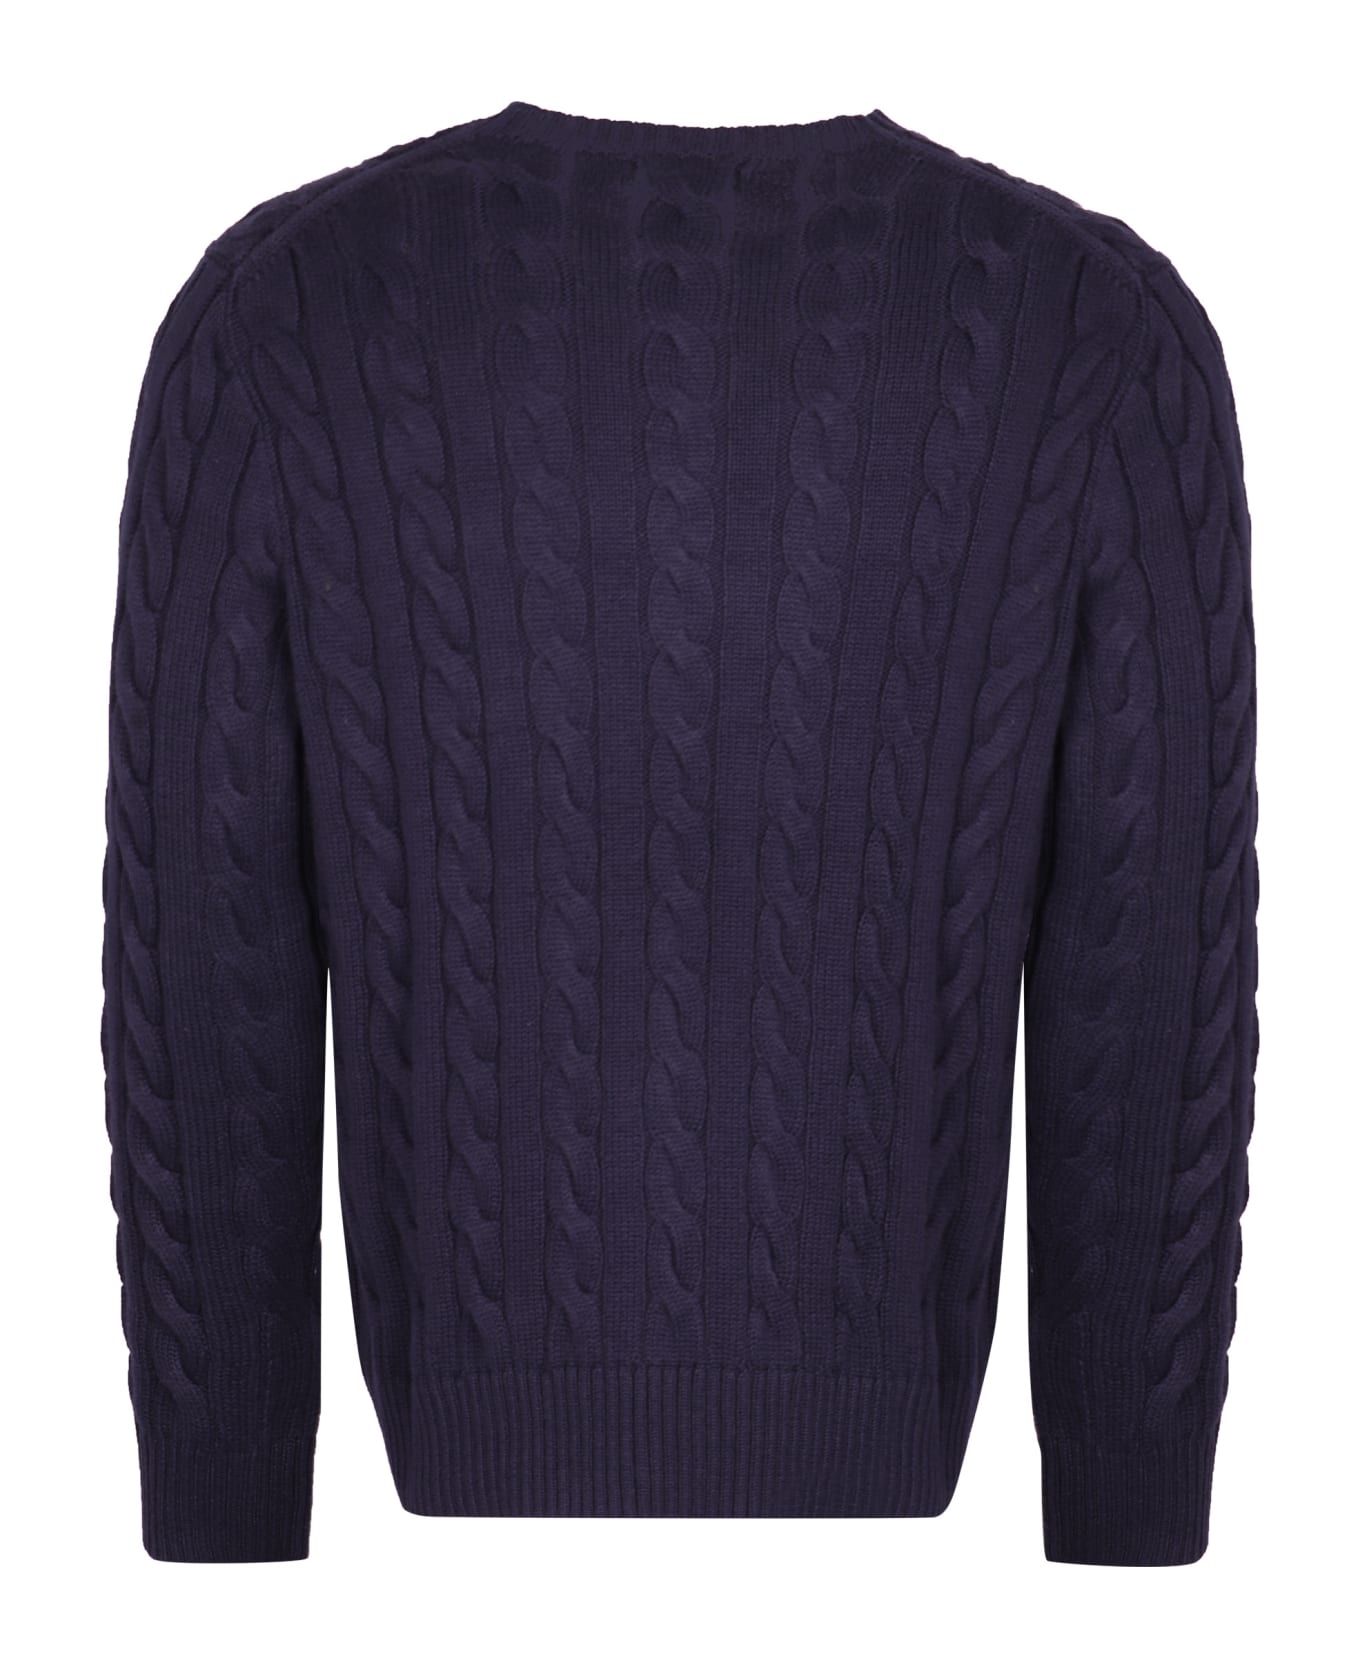 Polo Ralph Lauren Cable Knit Pullover - Hunter Navy